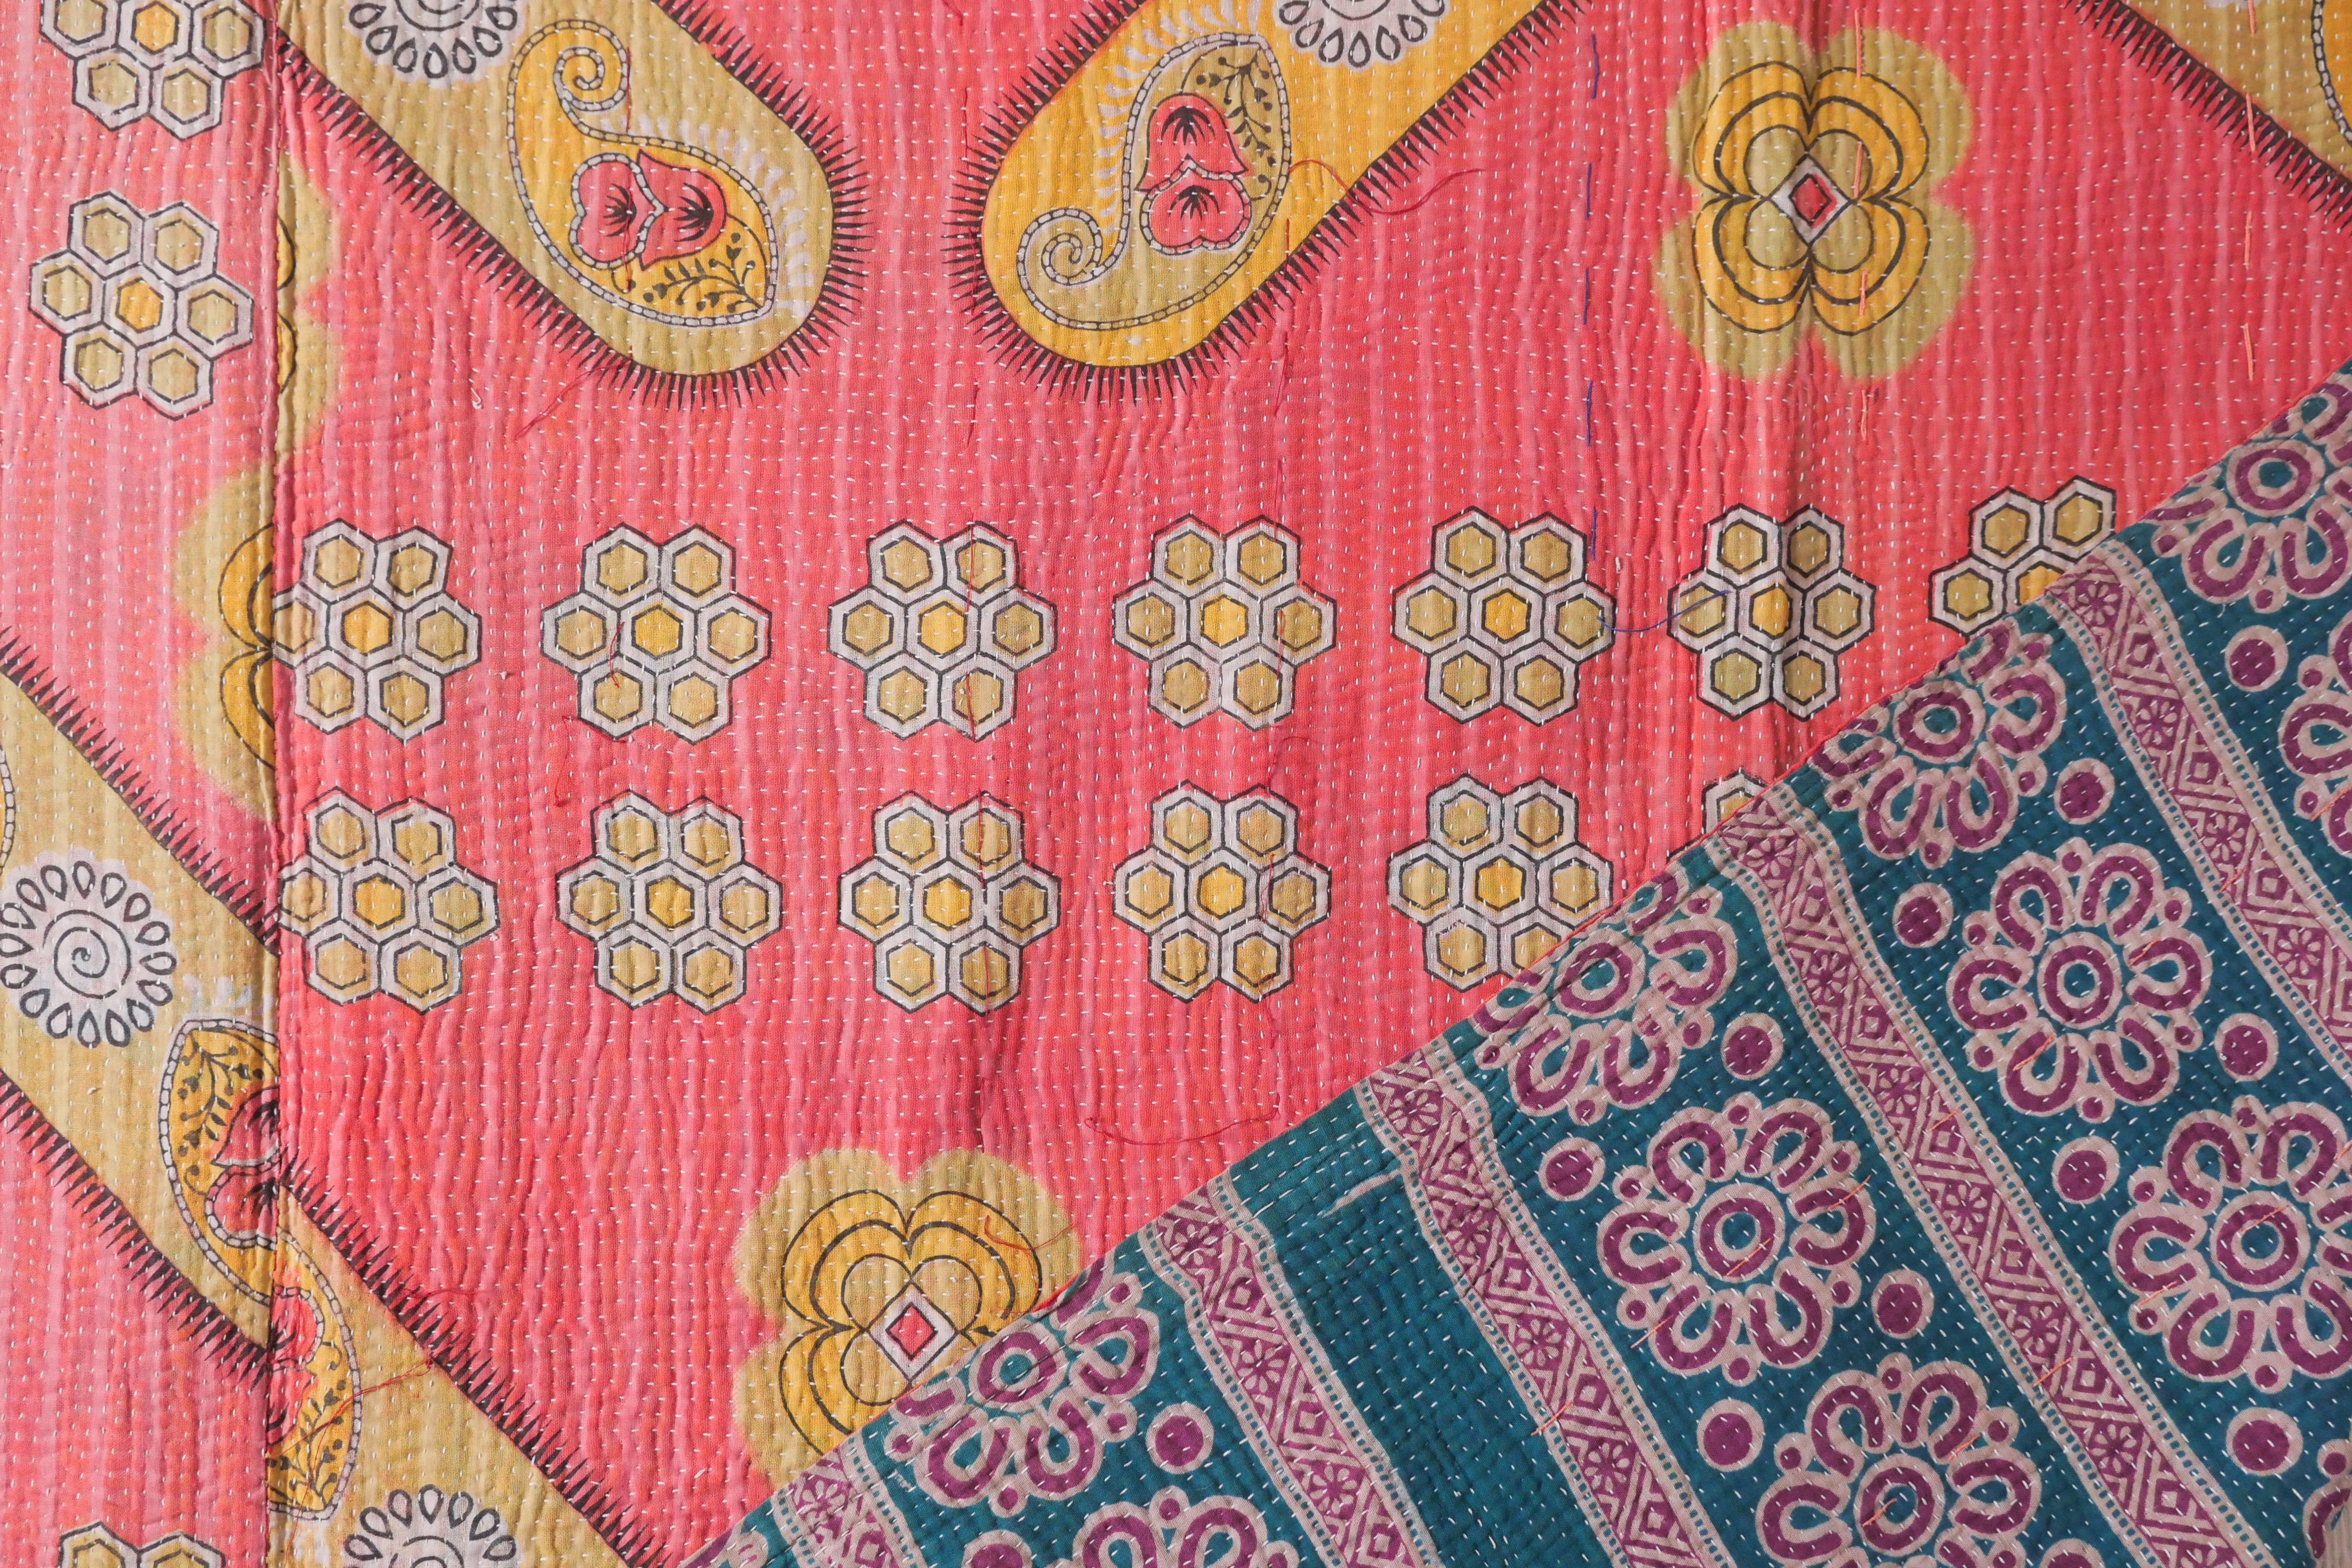 Kantha bedspread made with recycled saris